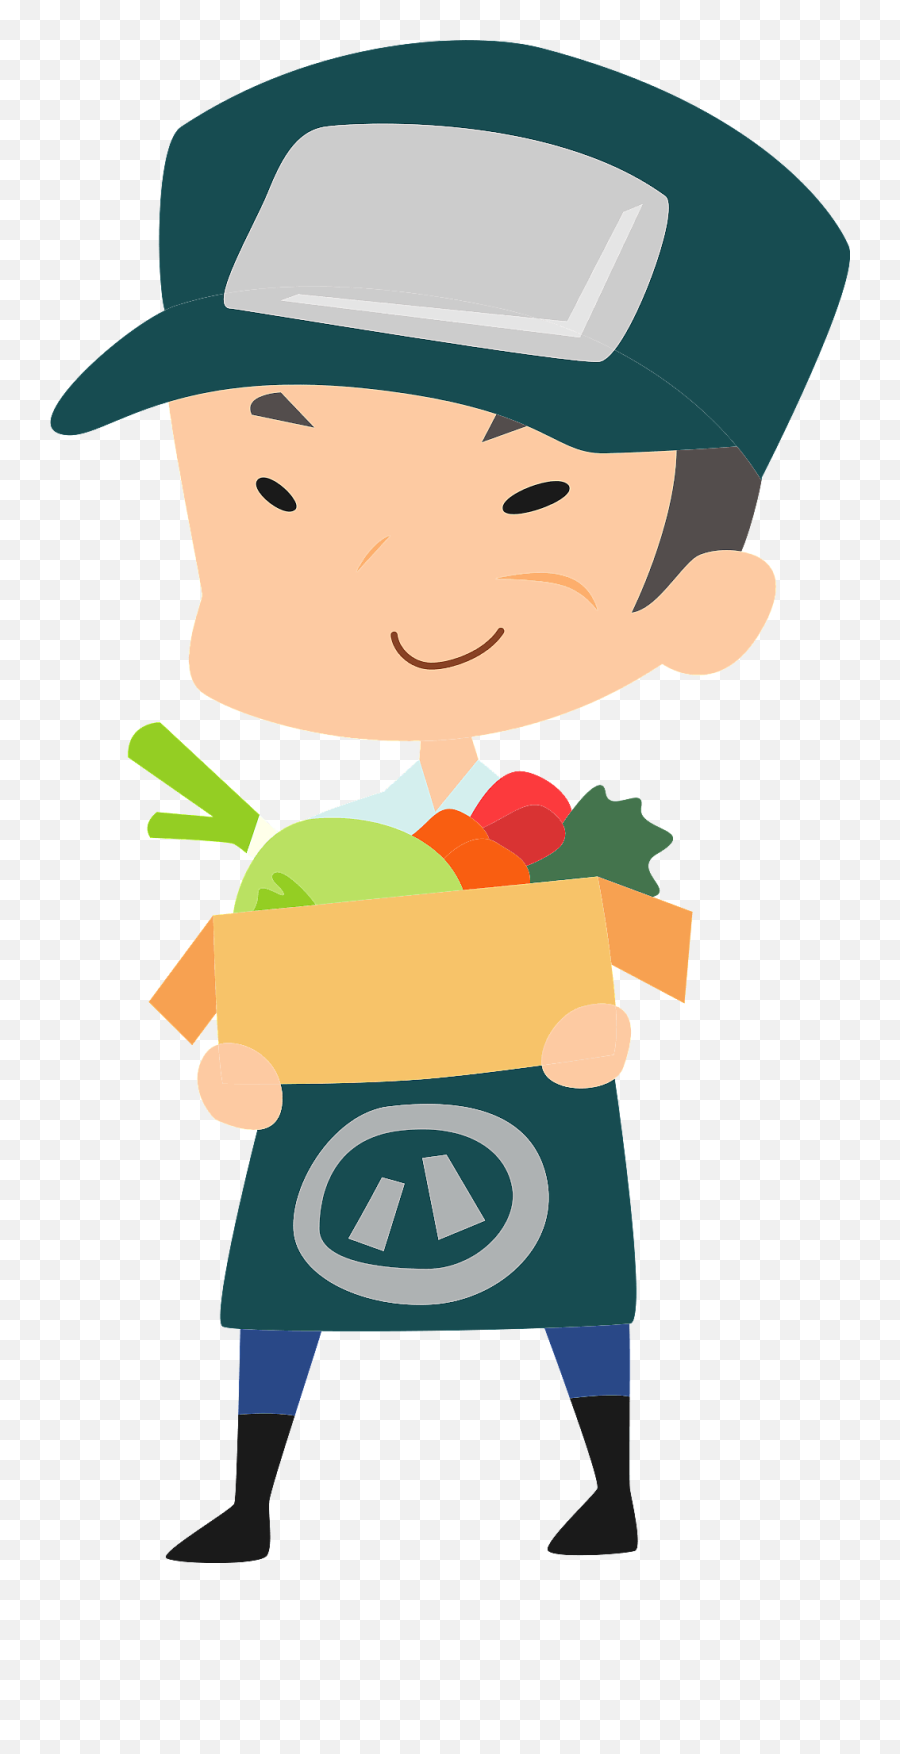 Grocery Store Worker With Vegetable Produce Clipart Free - Fictional Character Emoji,Grocery Store Clipart